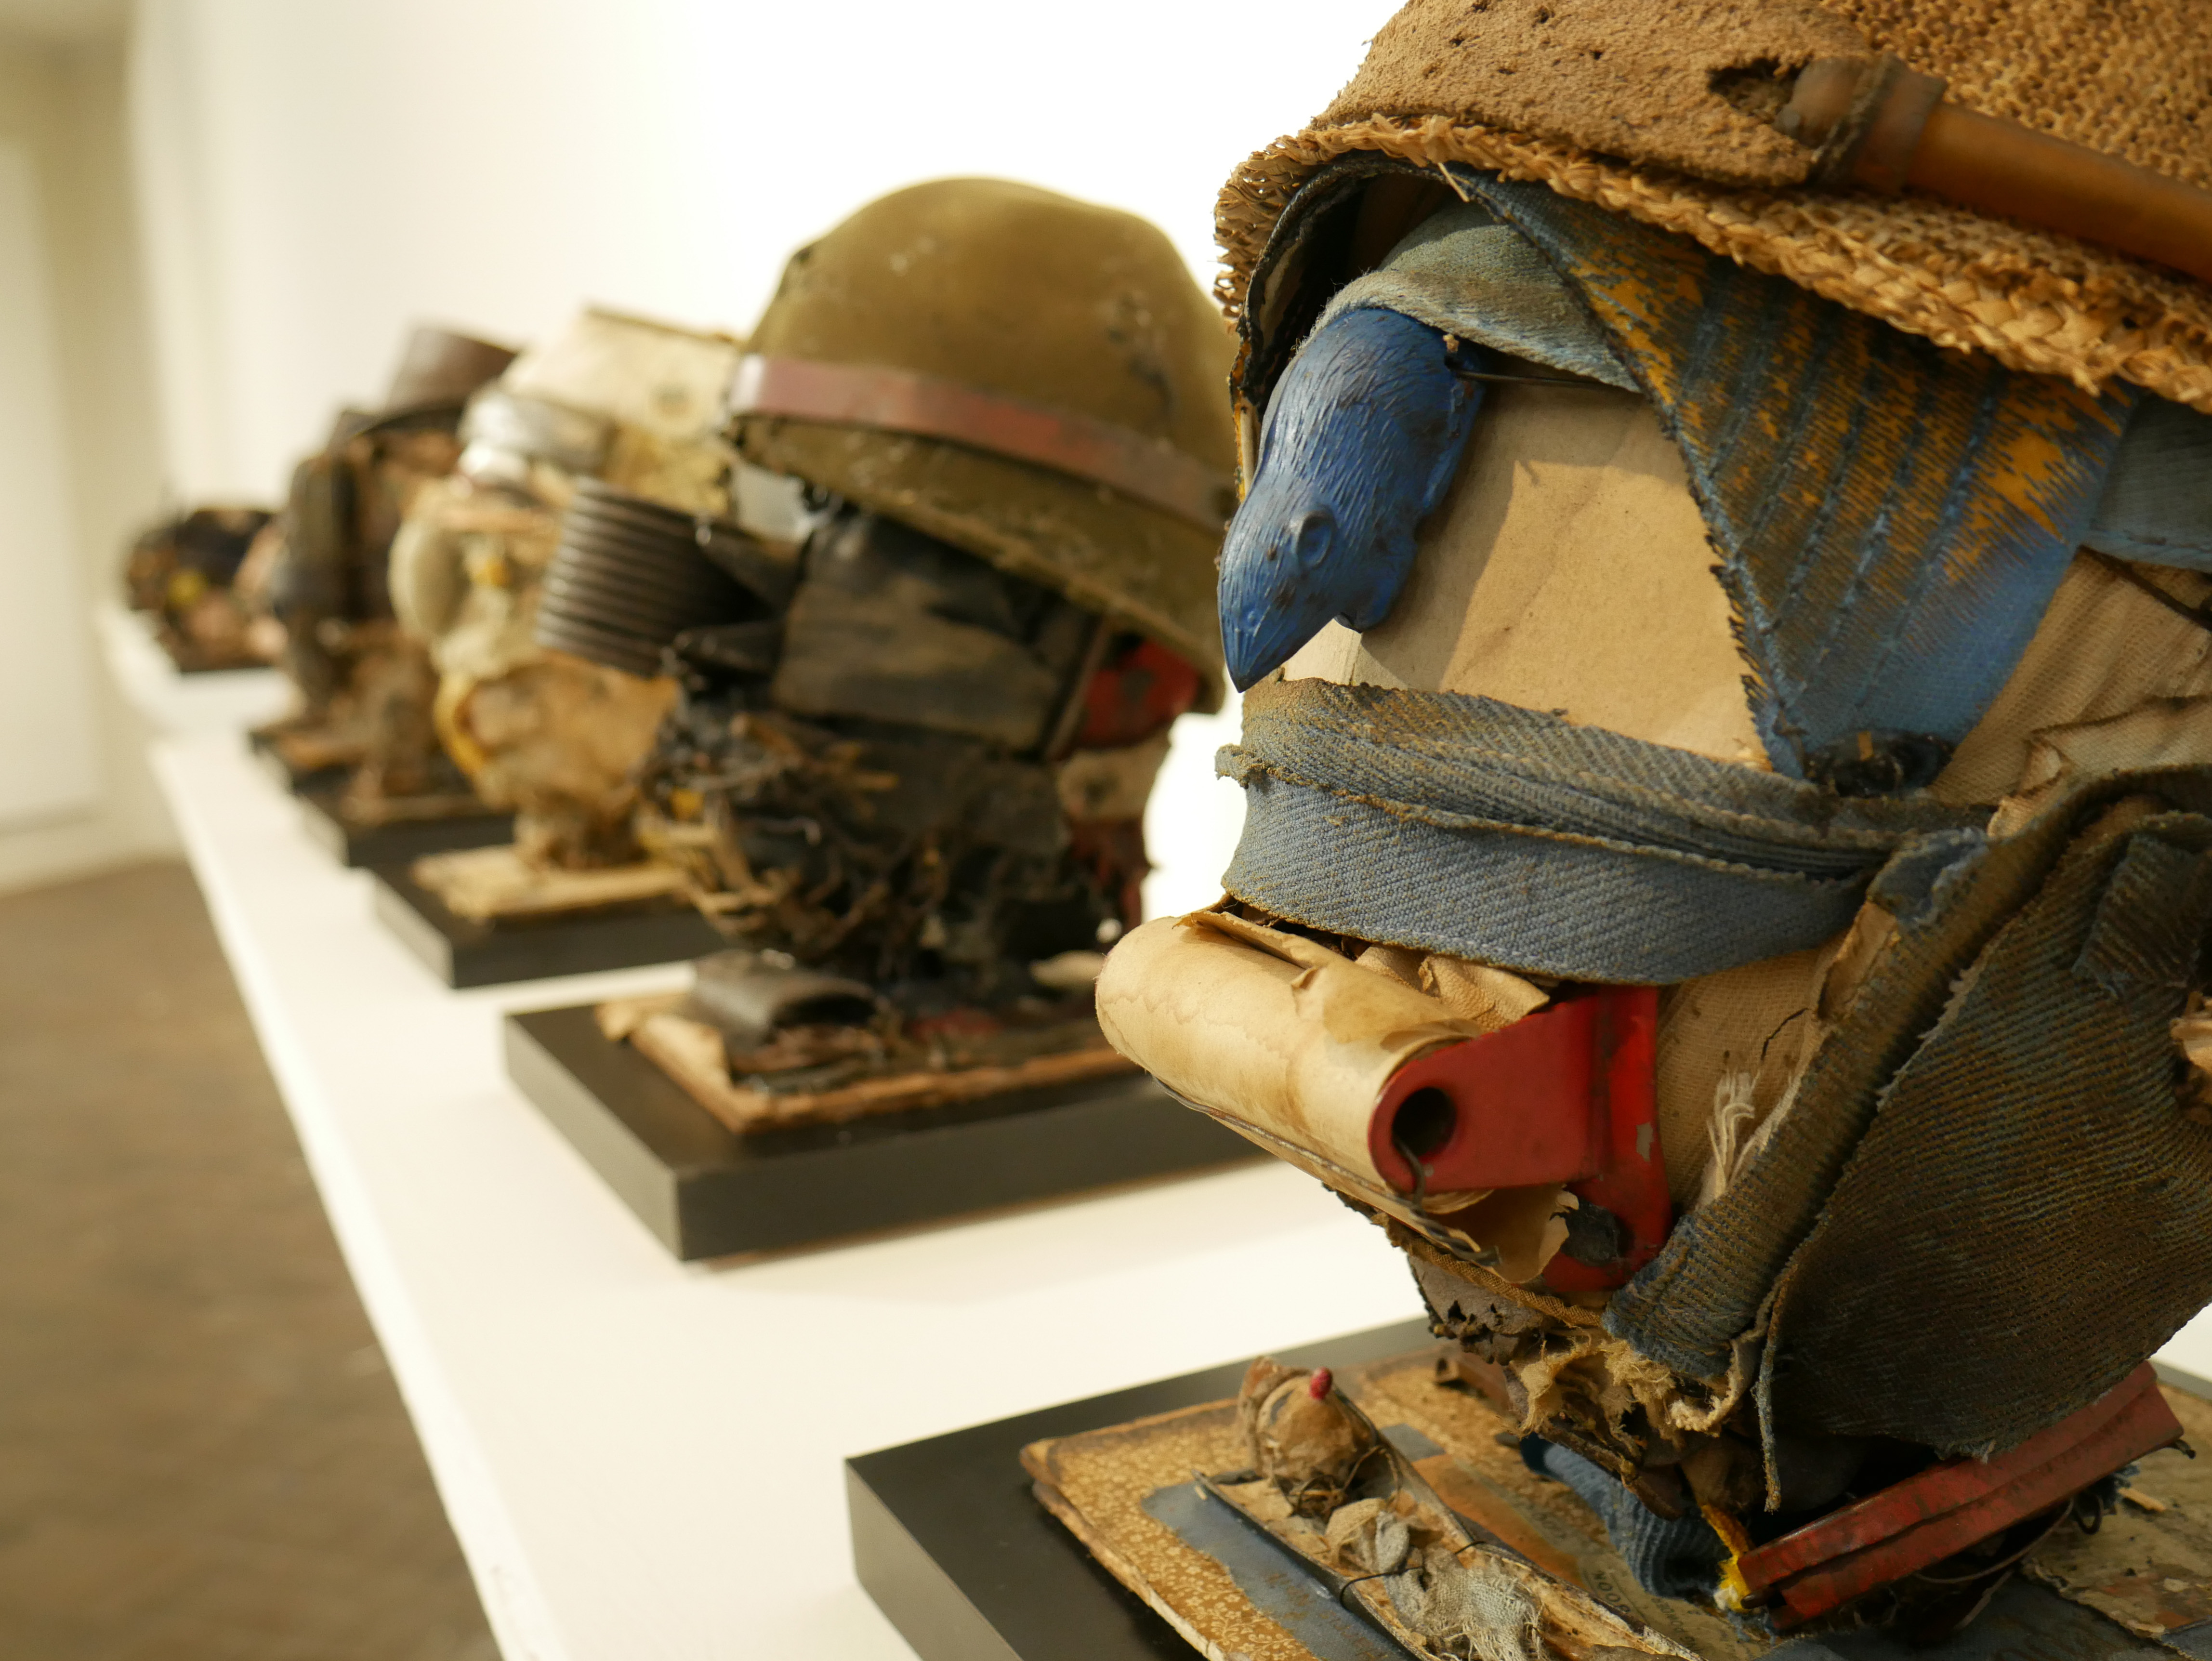 A row of busts constructed from found materials are displayed in a museum gallery space.